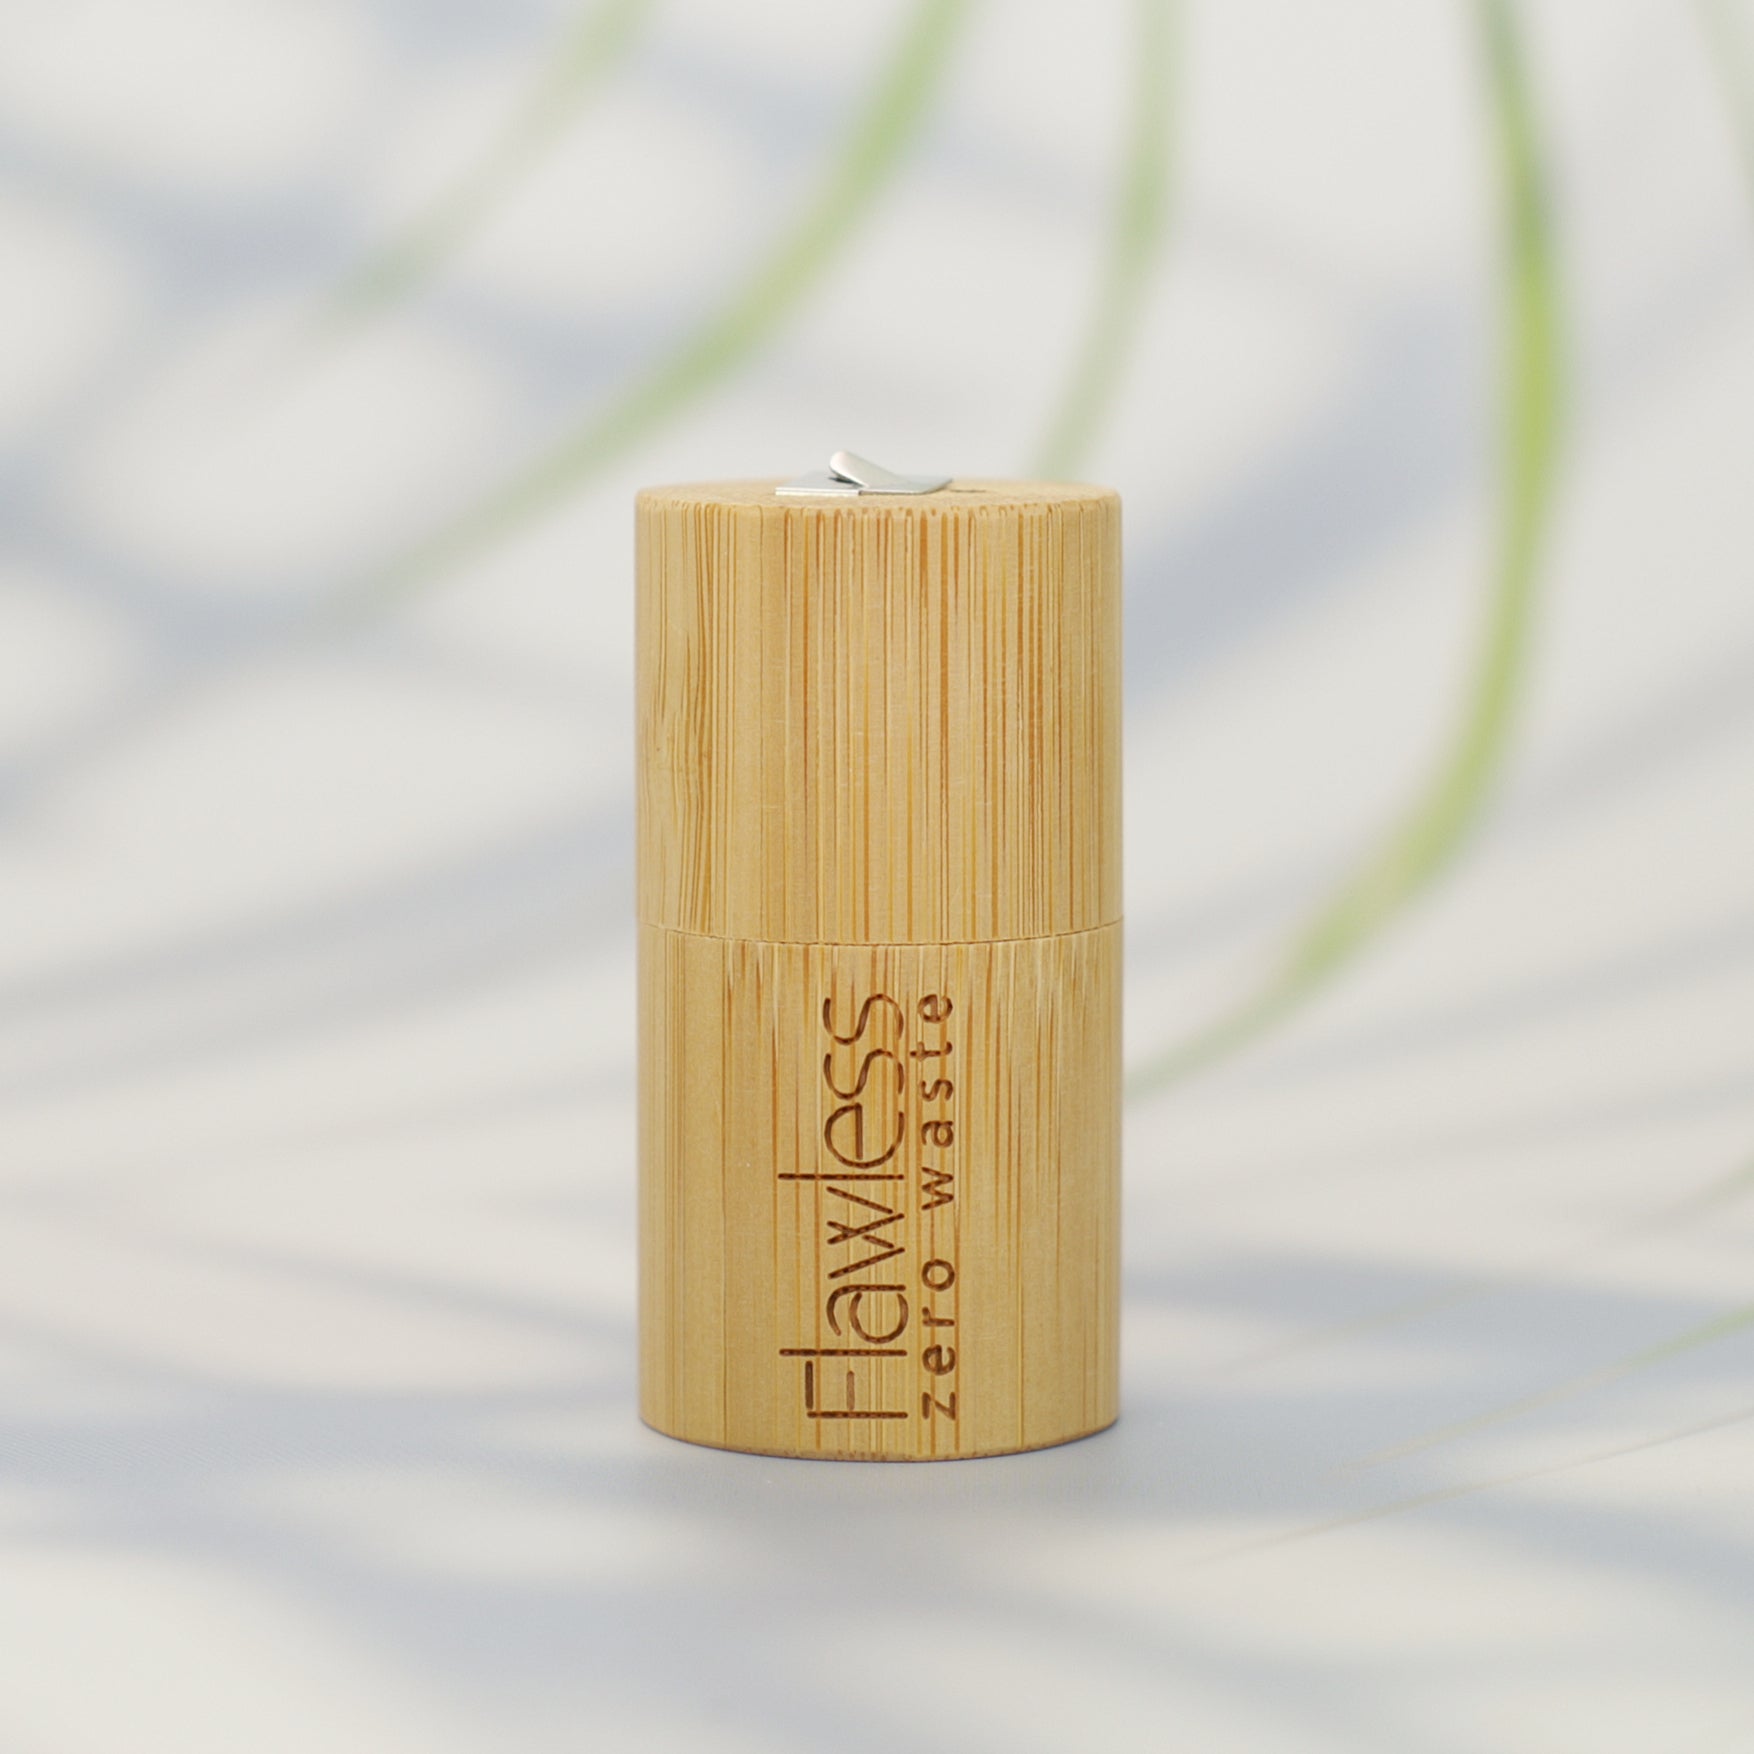 Compostable Dental Floss with Bamboo Dispenser - Peppermint